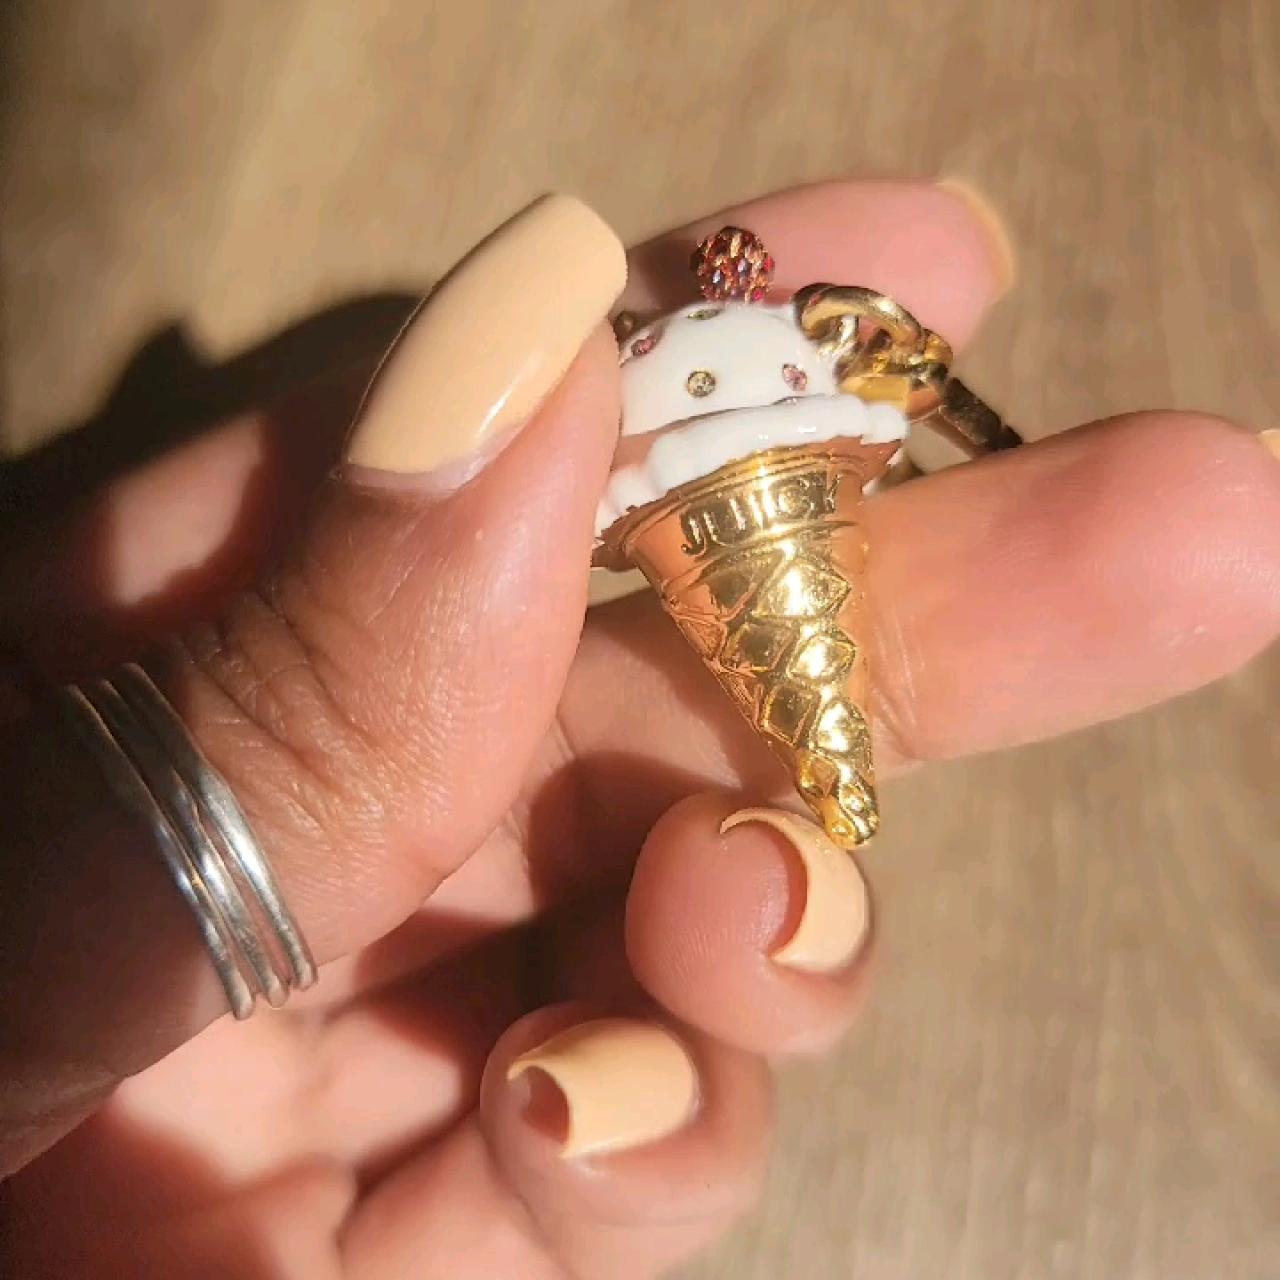 Juicy couture ice cream charm in amazing condition - Depop